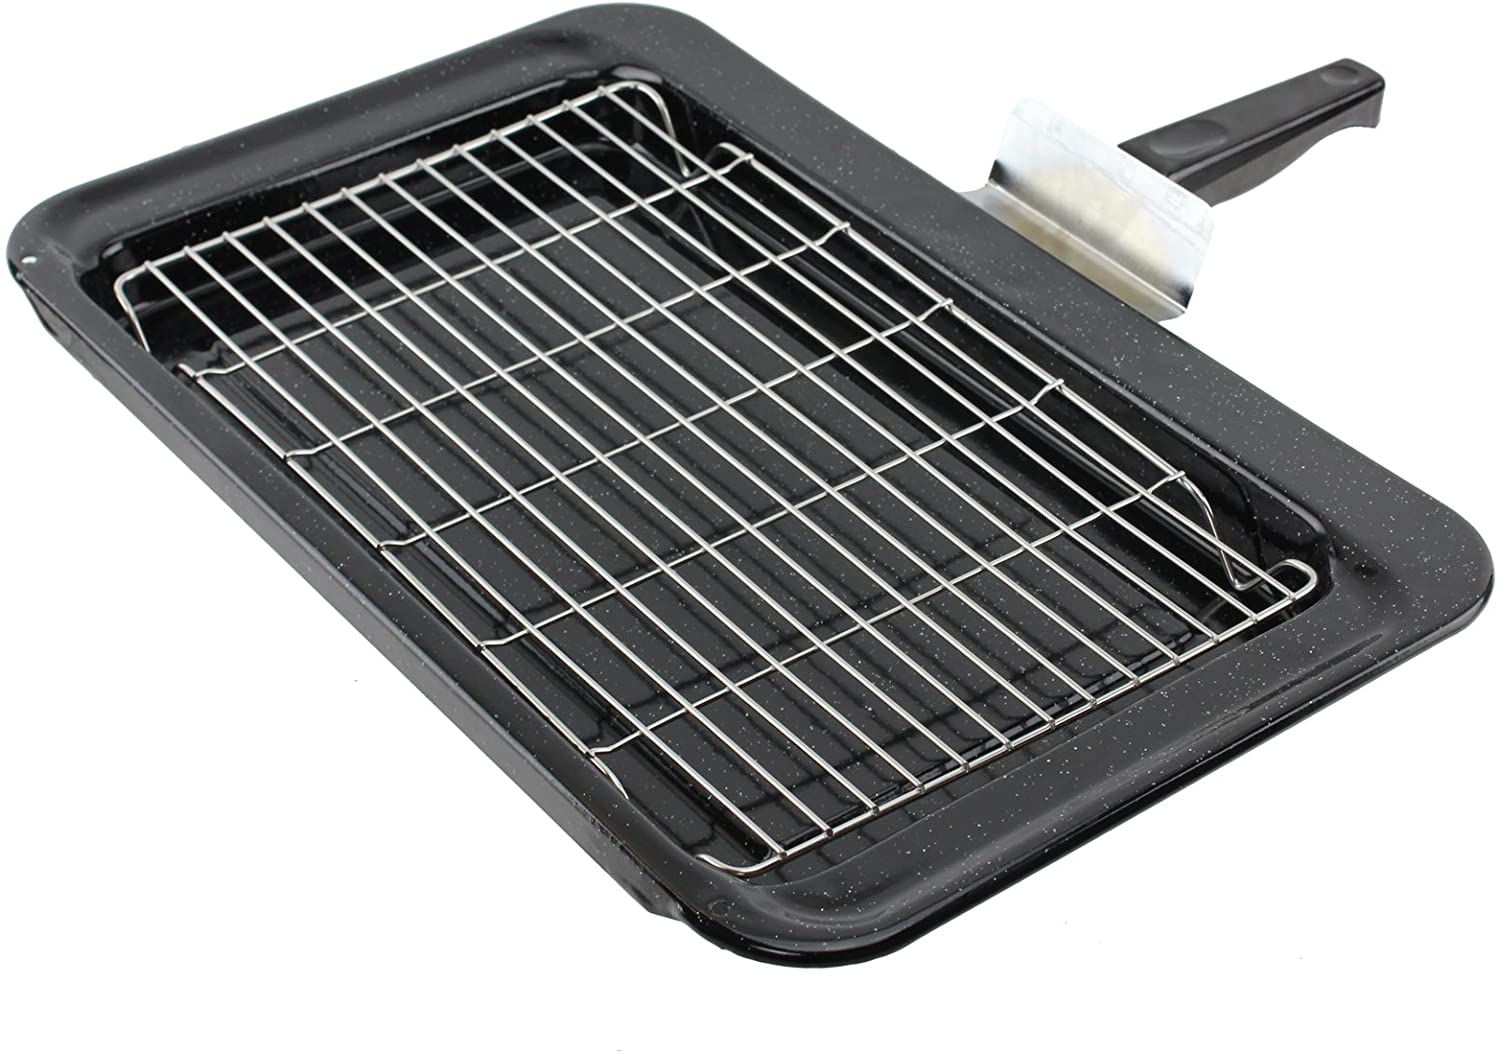 Enamel Grill Pan Tray Rack Grid Handle for Rangemaster Oven Cooker 445 x 276 mm